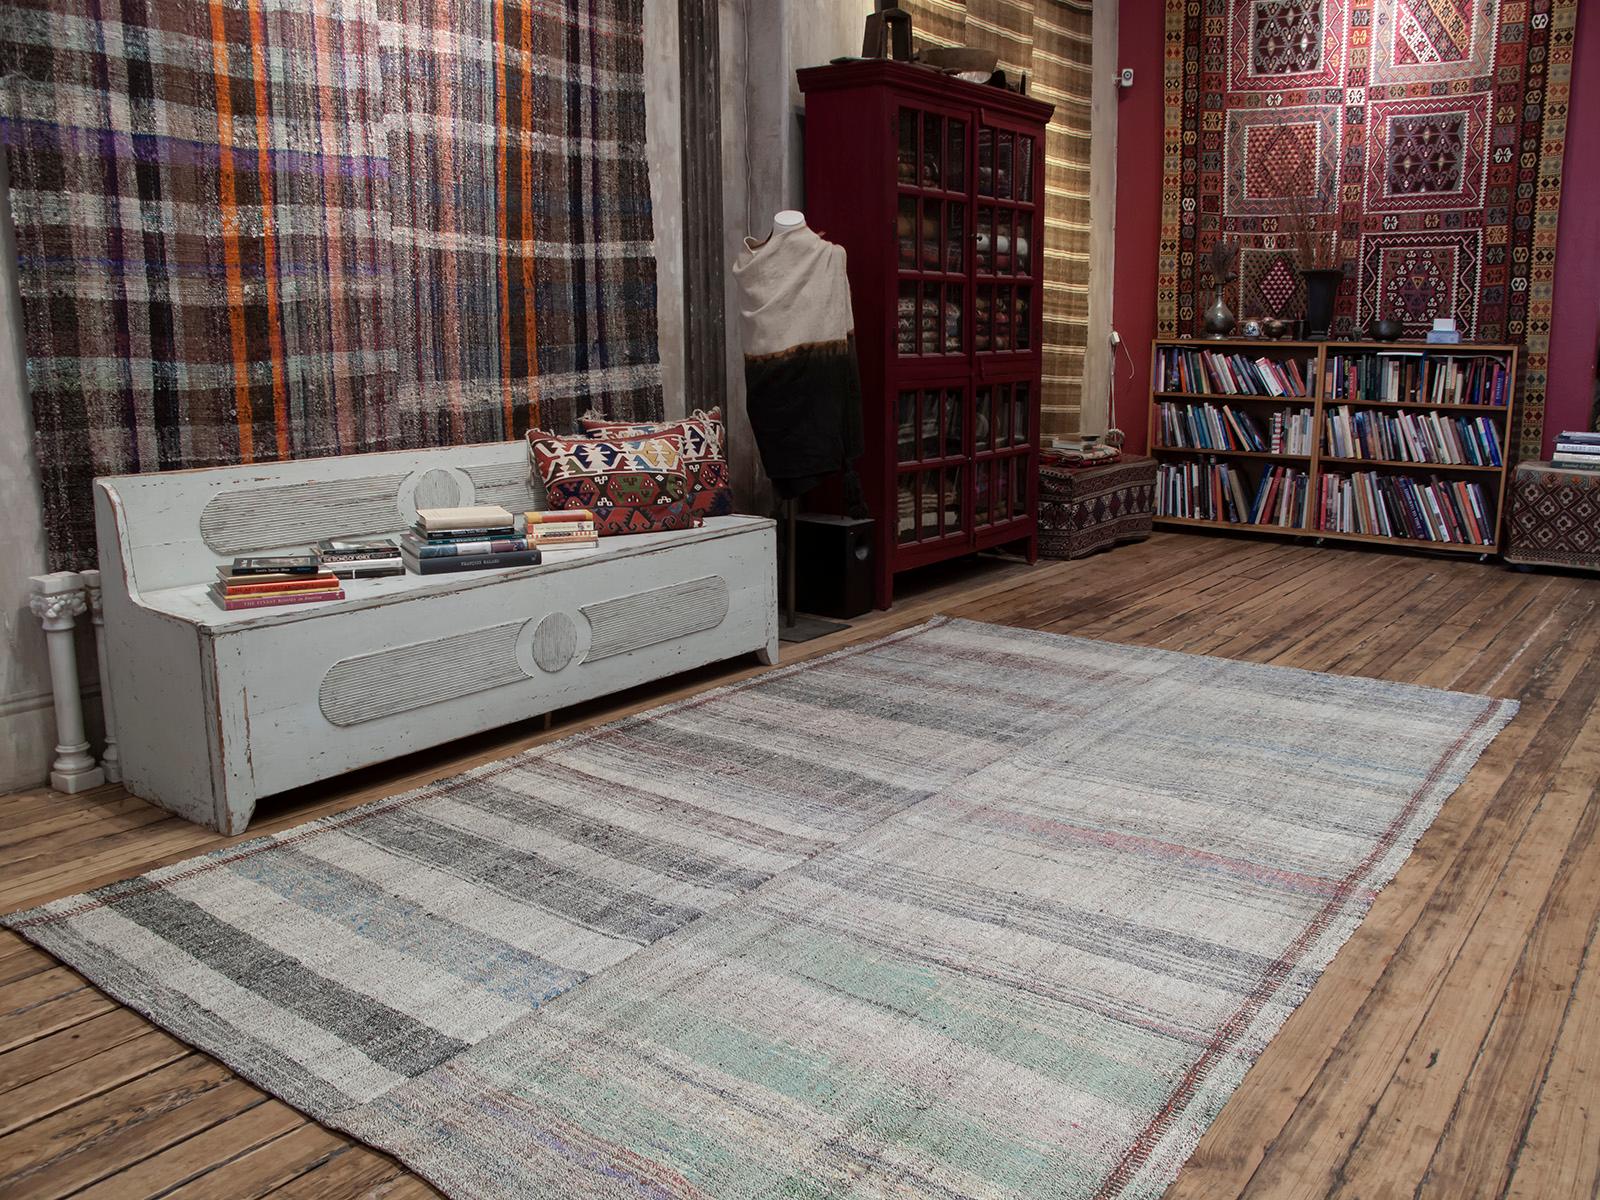 An old flat-weave from Central Turkey, woven with an ingenious mixture of colorful cotton rag and goat hair, used as a sturdy, everyday floor cover in the weaver's household. It consists of two panels woven on a narrow loom and seamed together in